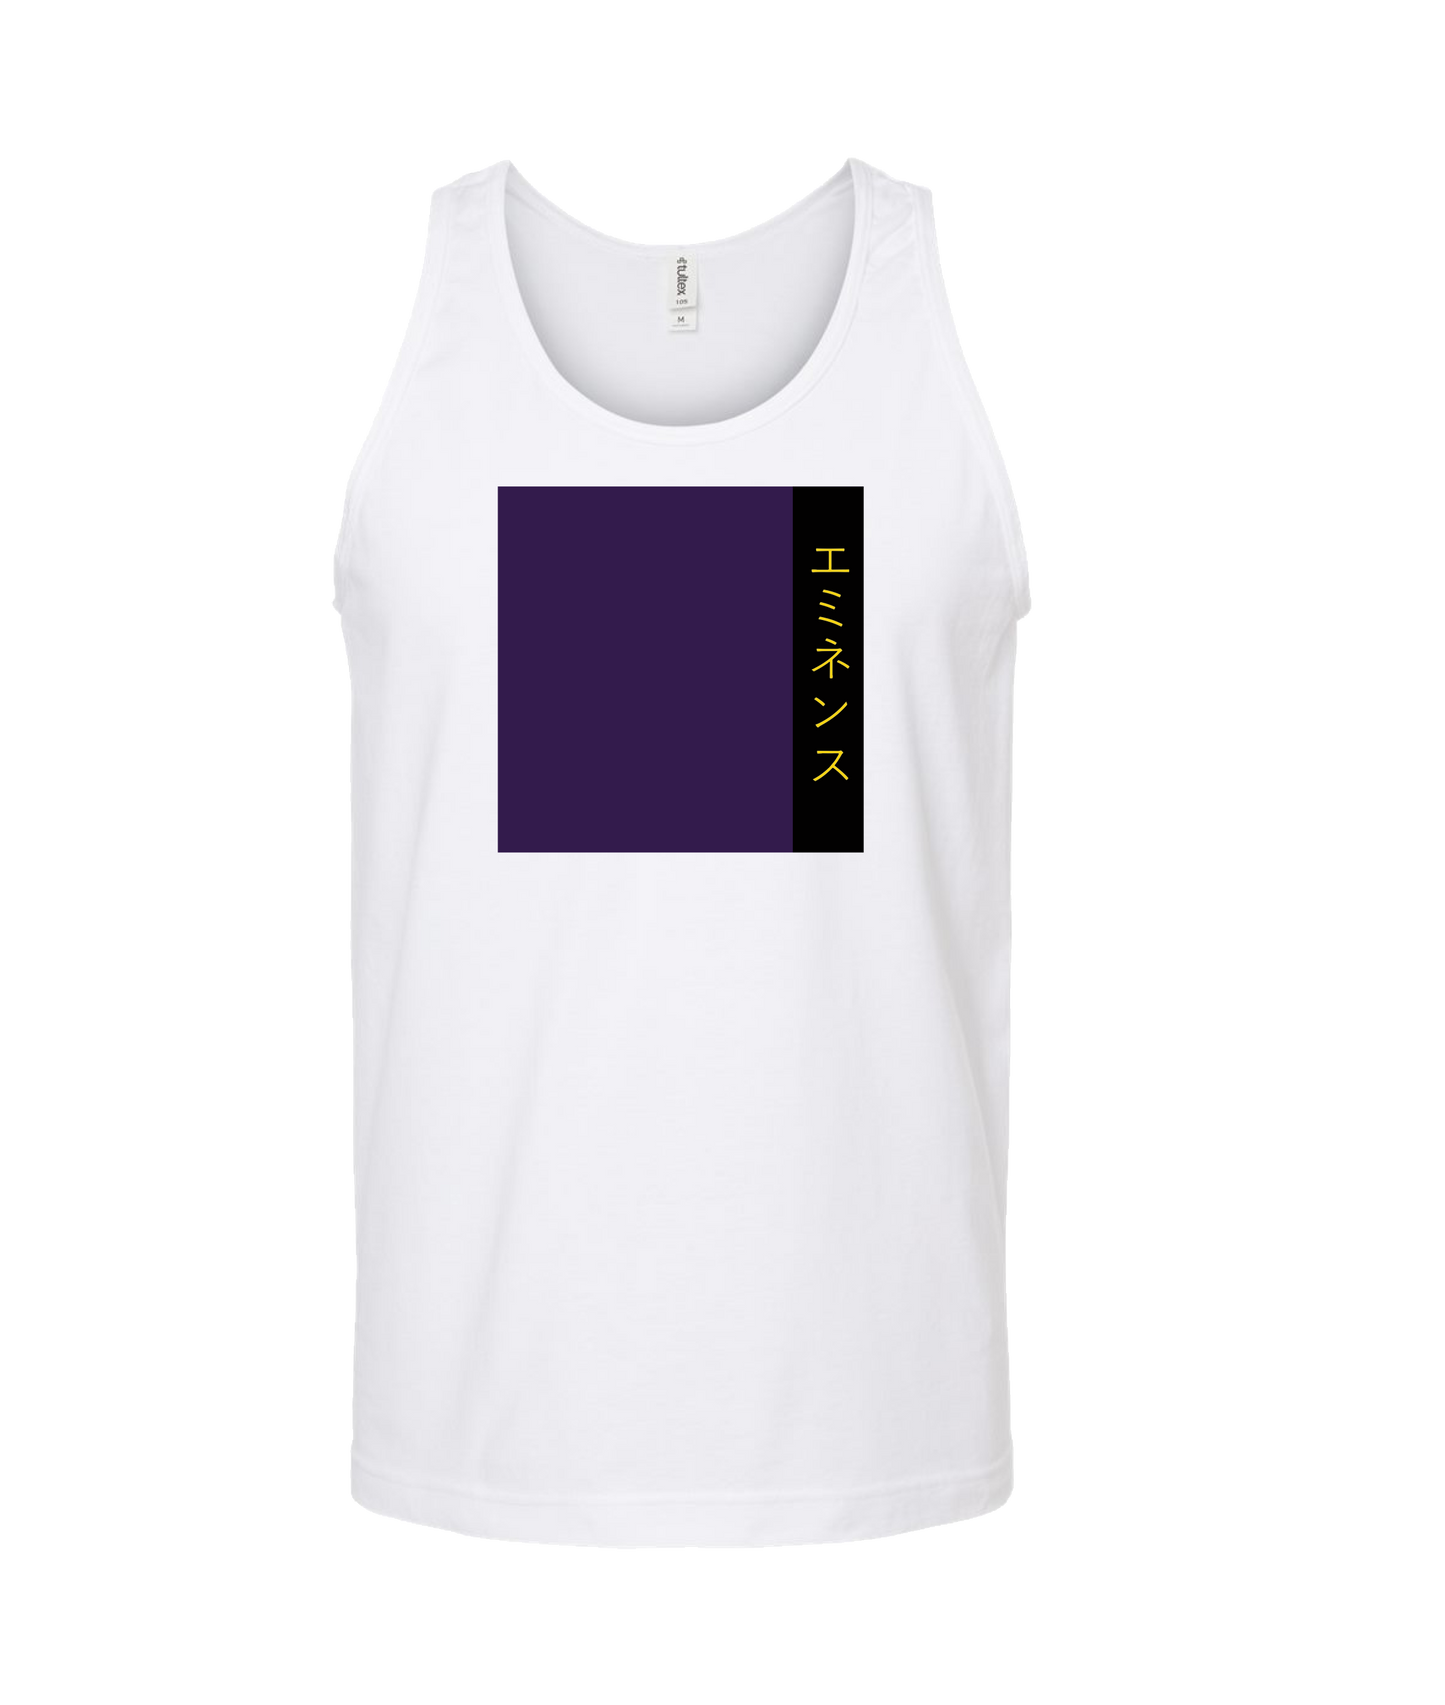 atomicclothing.com - Purple and Stripe - White Tank Top